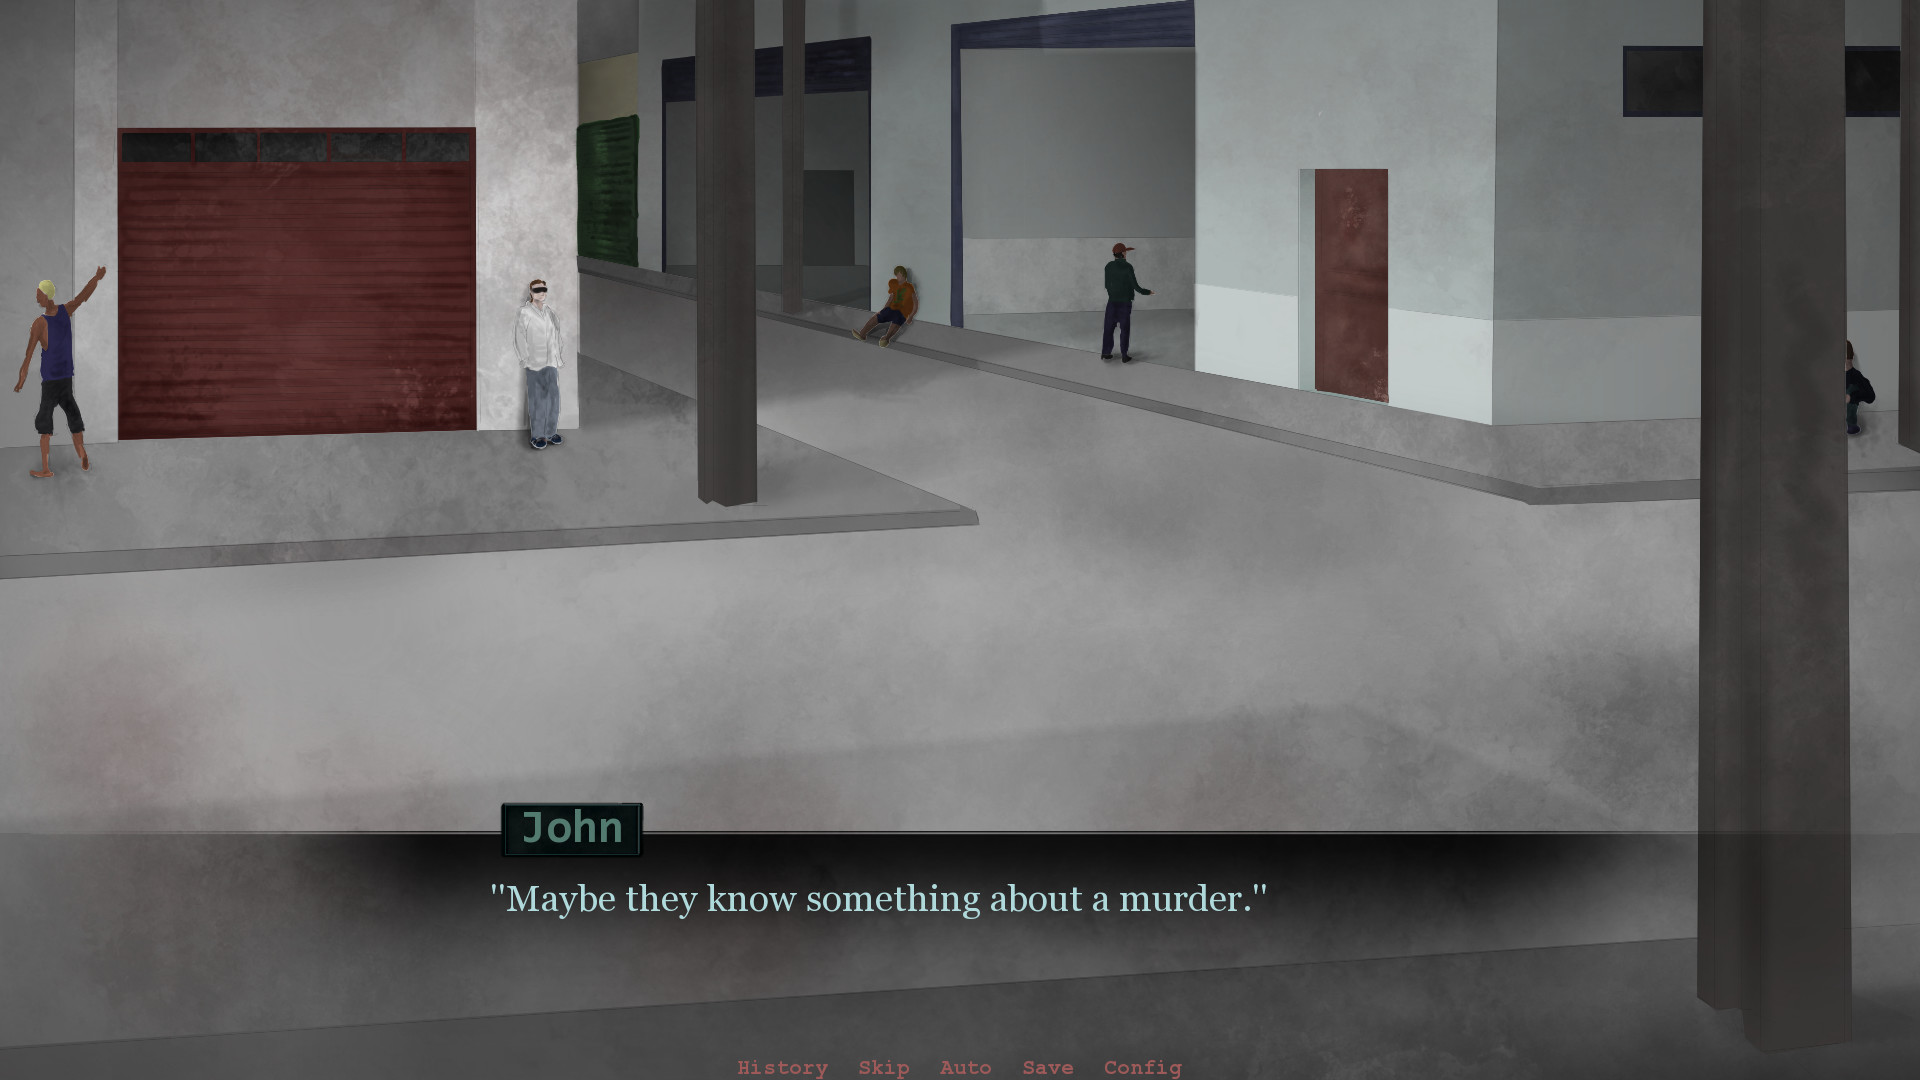 Traumatic Syndrome - Investigative Horror Visual Novel Free Download